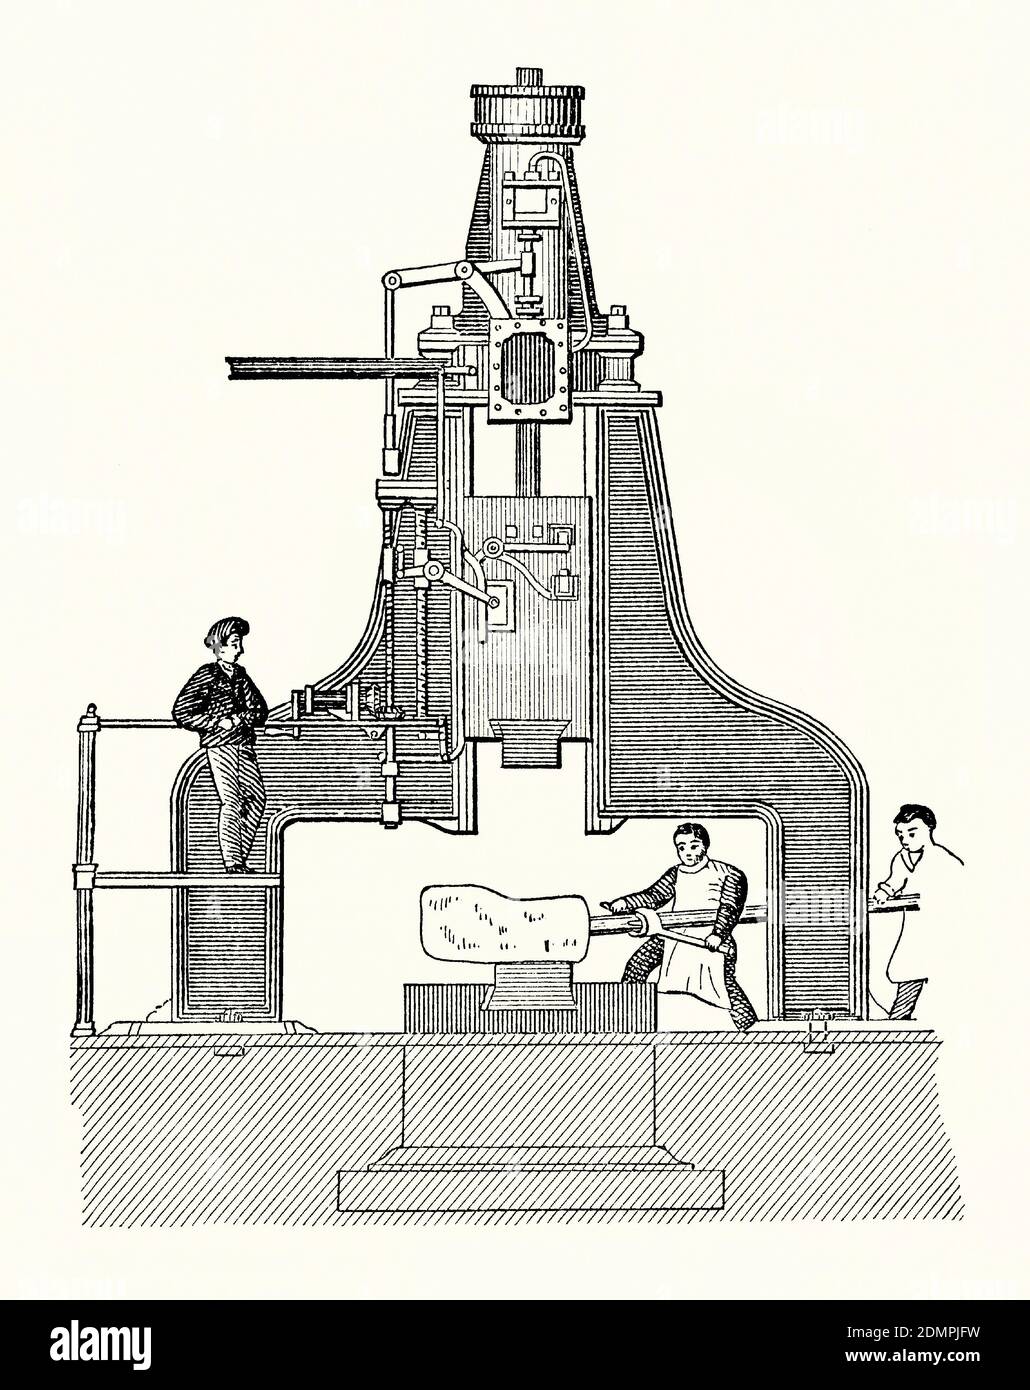 An old engraving of Nasmyth’s steam hammer c. 1850. It is from a Victorian mechanical engineering book of the 1880s. A steam hammer (or drop hammer) is an industrial power hammer used for shaping forgings. The hammer is usually attached to a piston that slides within a fixed cylinder. Here two men lift the hot iron into place on to the ‘anvil’ under the hammer. James Watt described the steam hammer in 1784, but it was 1840 when the first working steam hammer was built. In 1843 there was a dispute between François Bourdon of France and James Nasmyth of Britain over who had invented it. Stock Photo